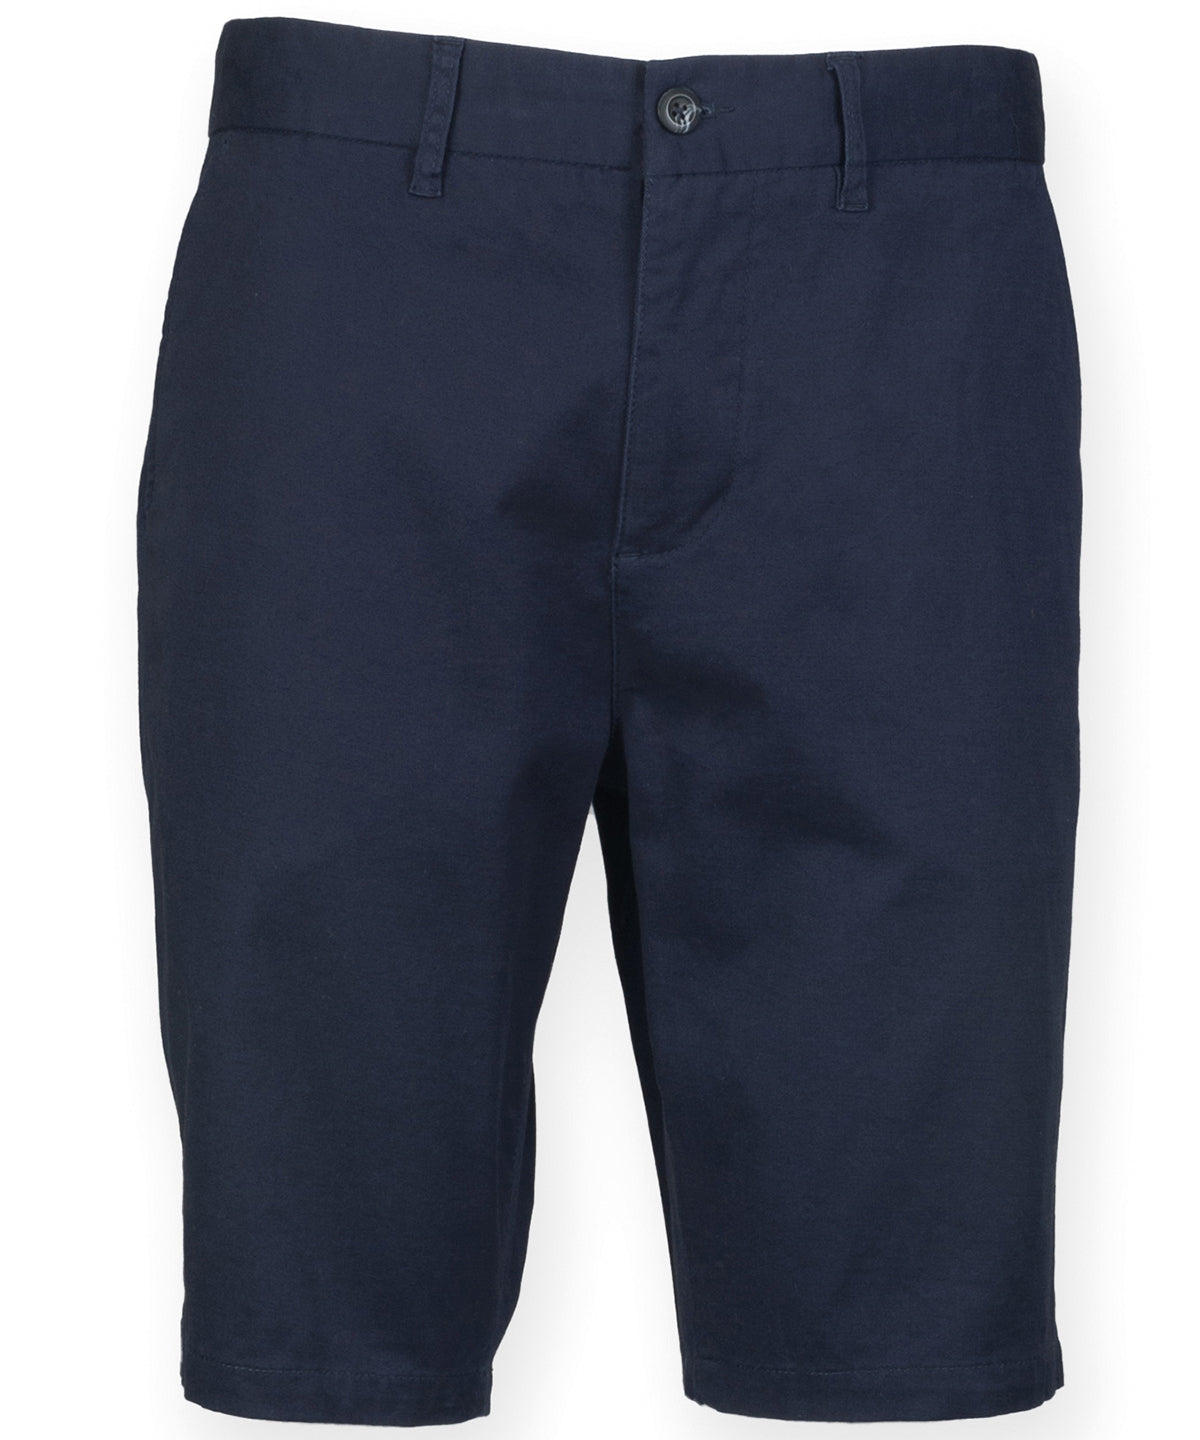 Personalised Shorts - Navy Front Row Stretch chino shorts